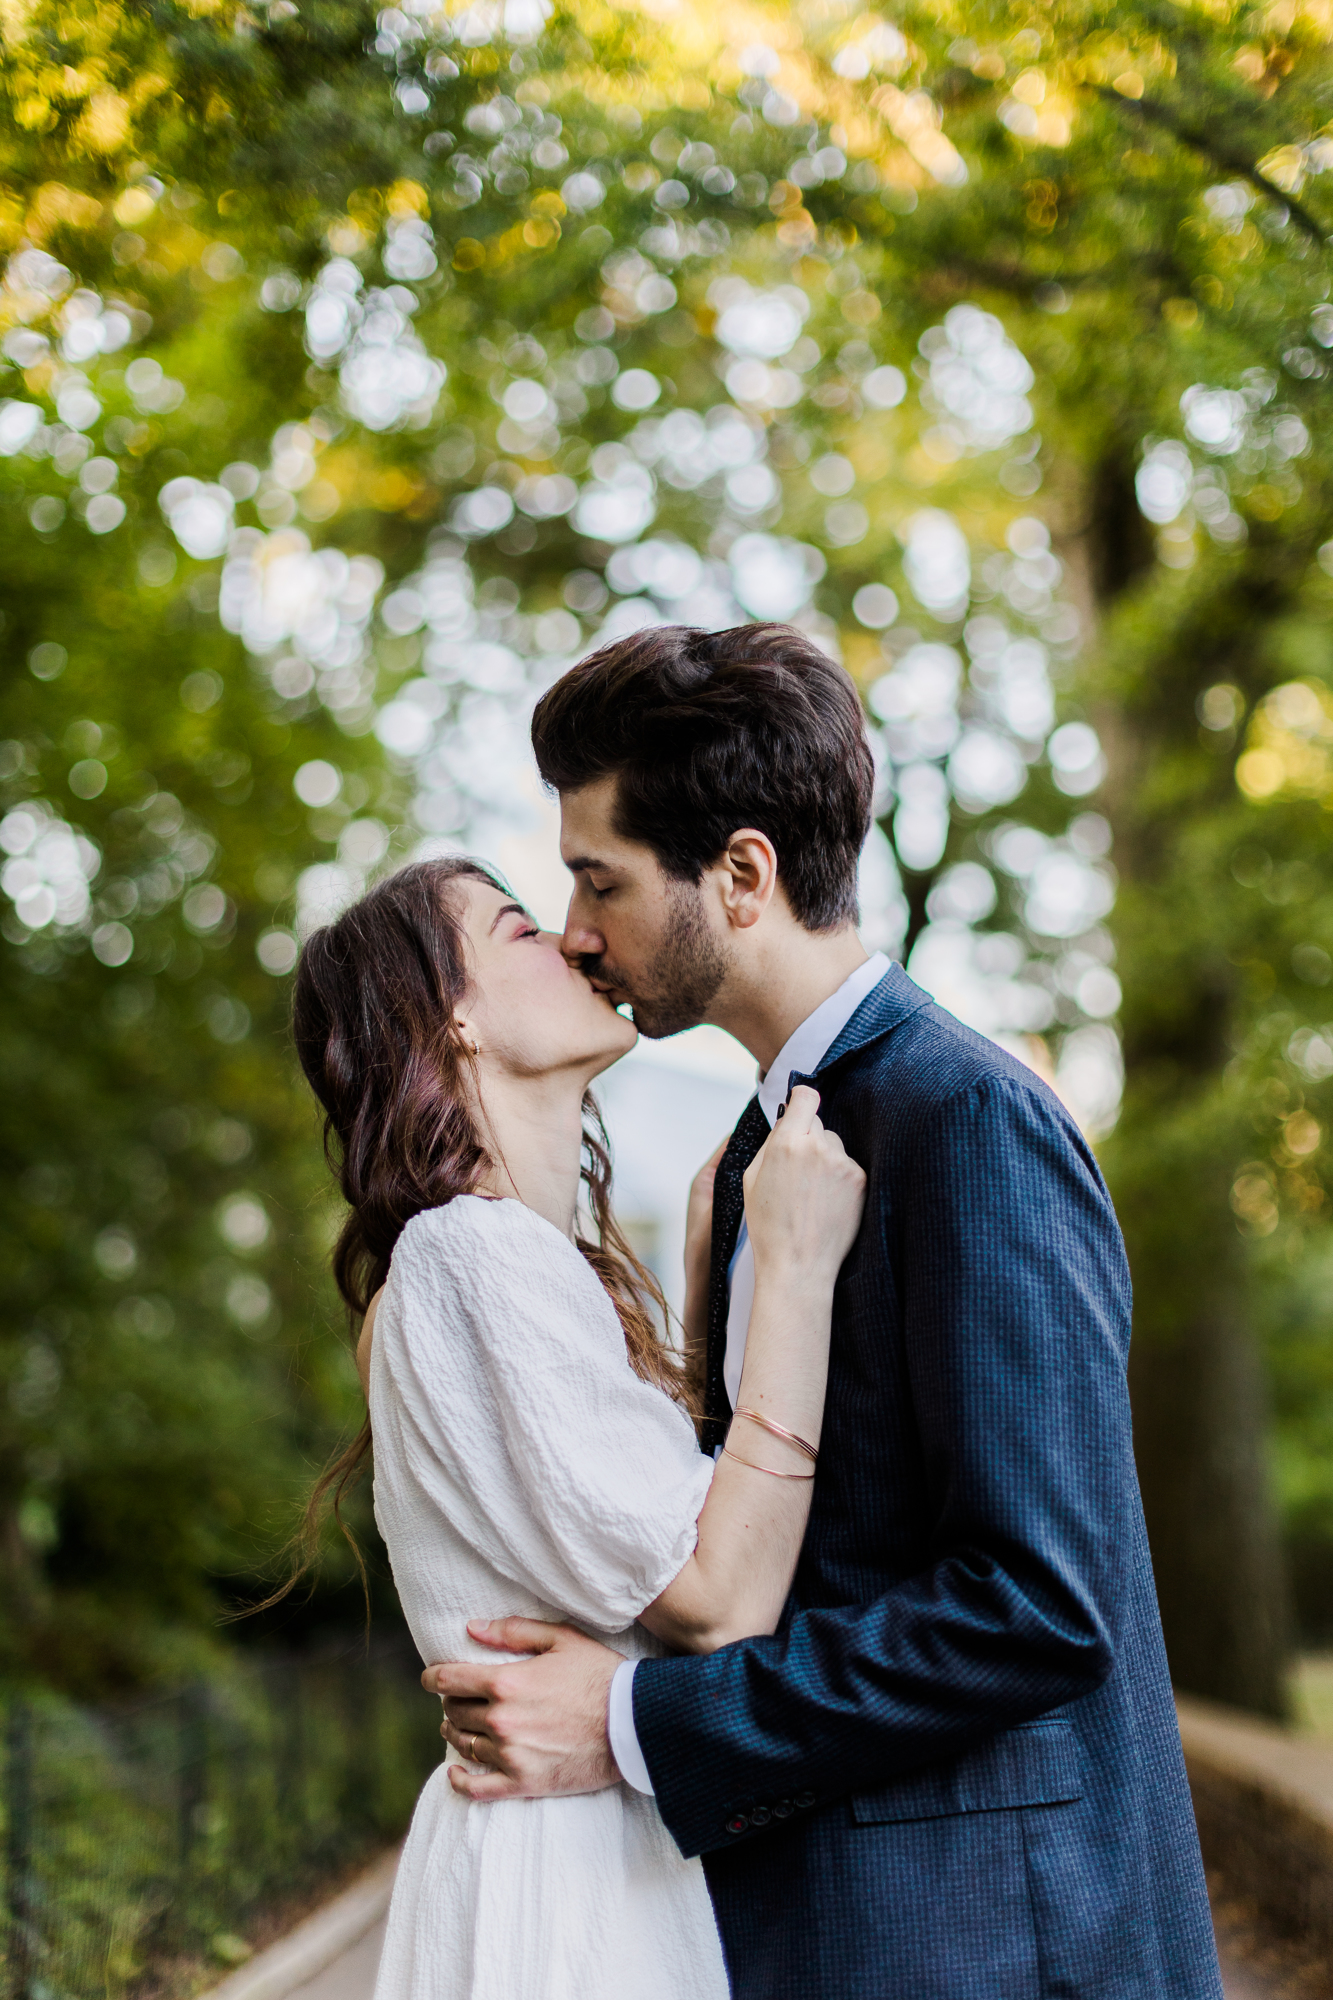 Magical Central Park Engagement Photos in NYC